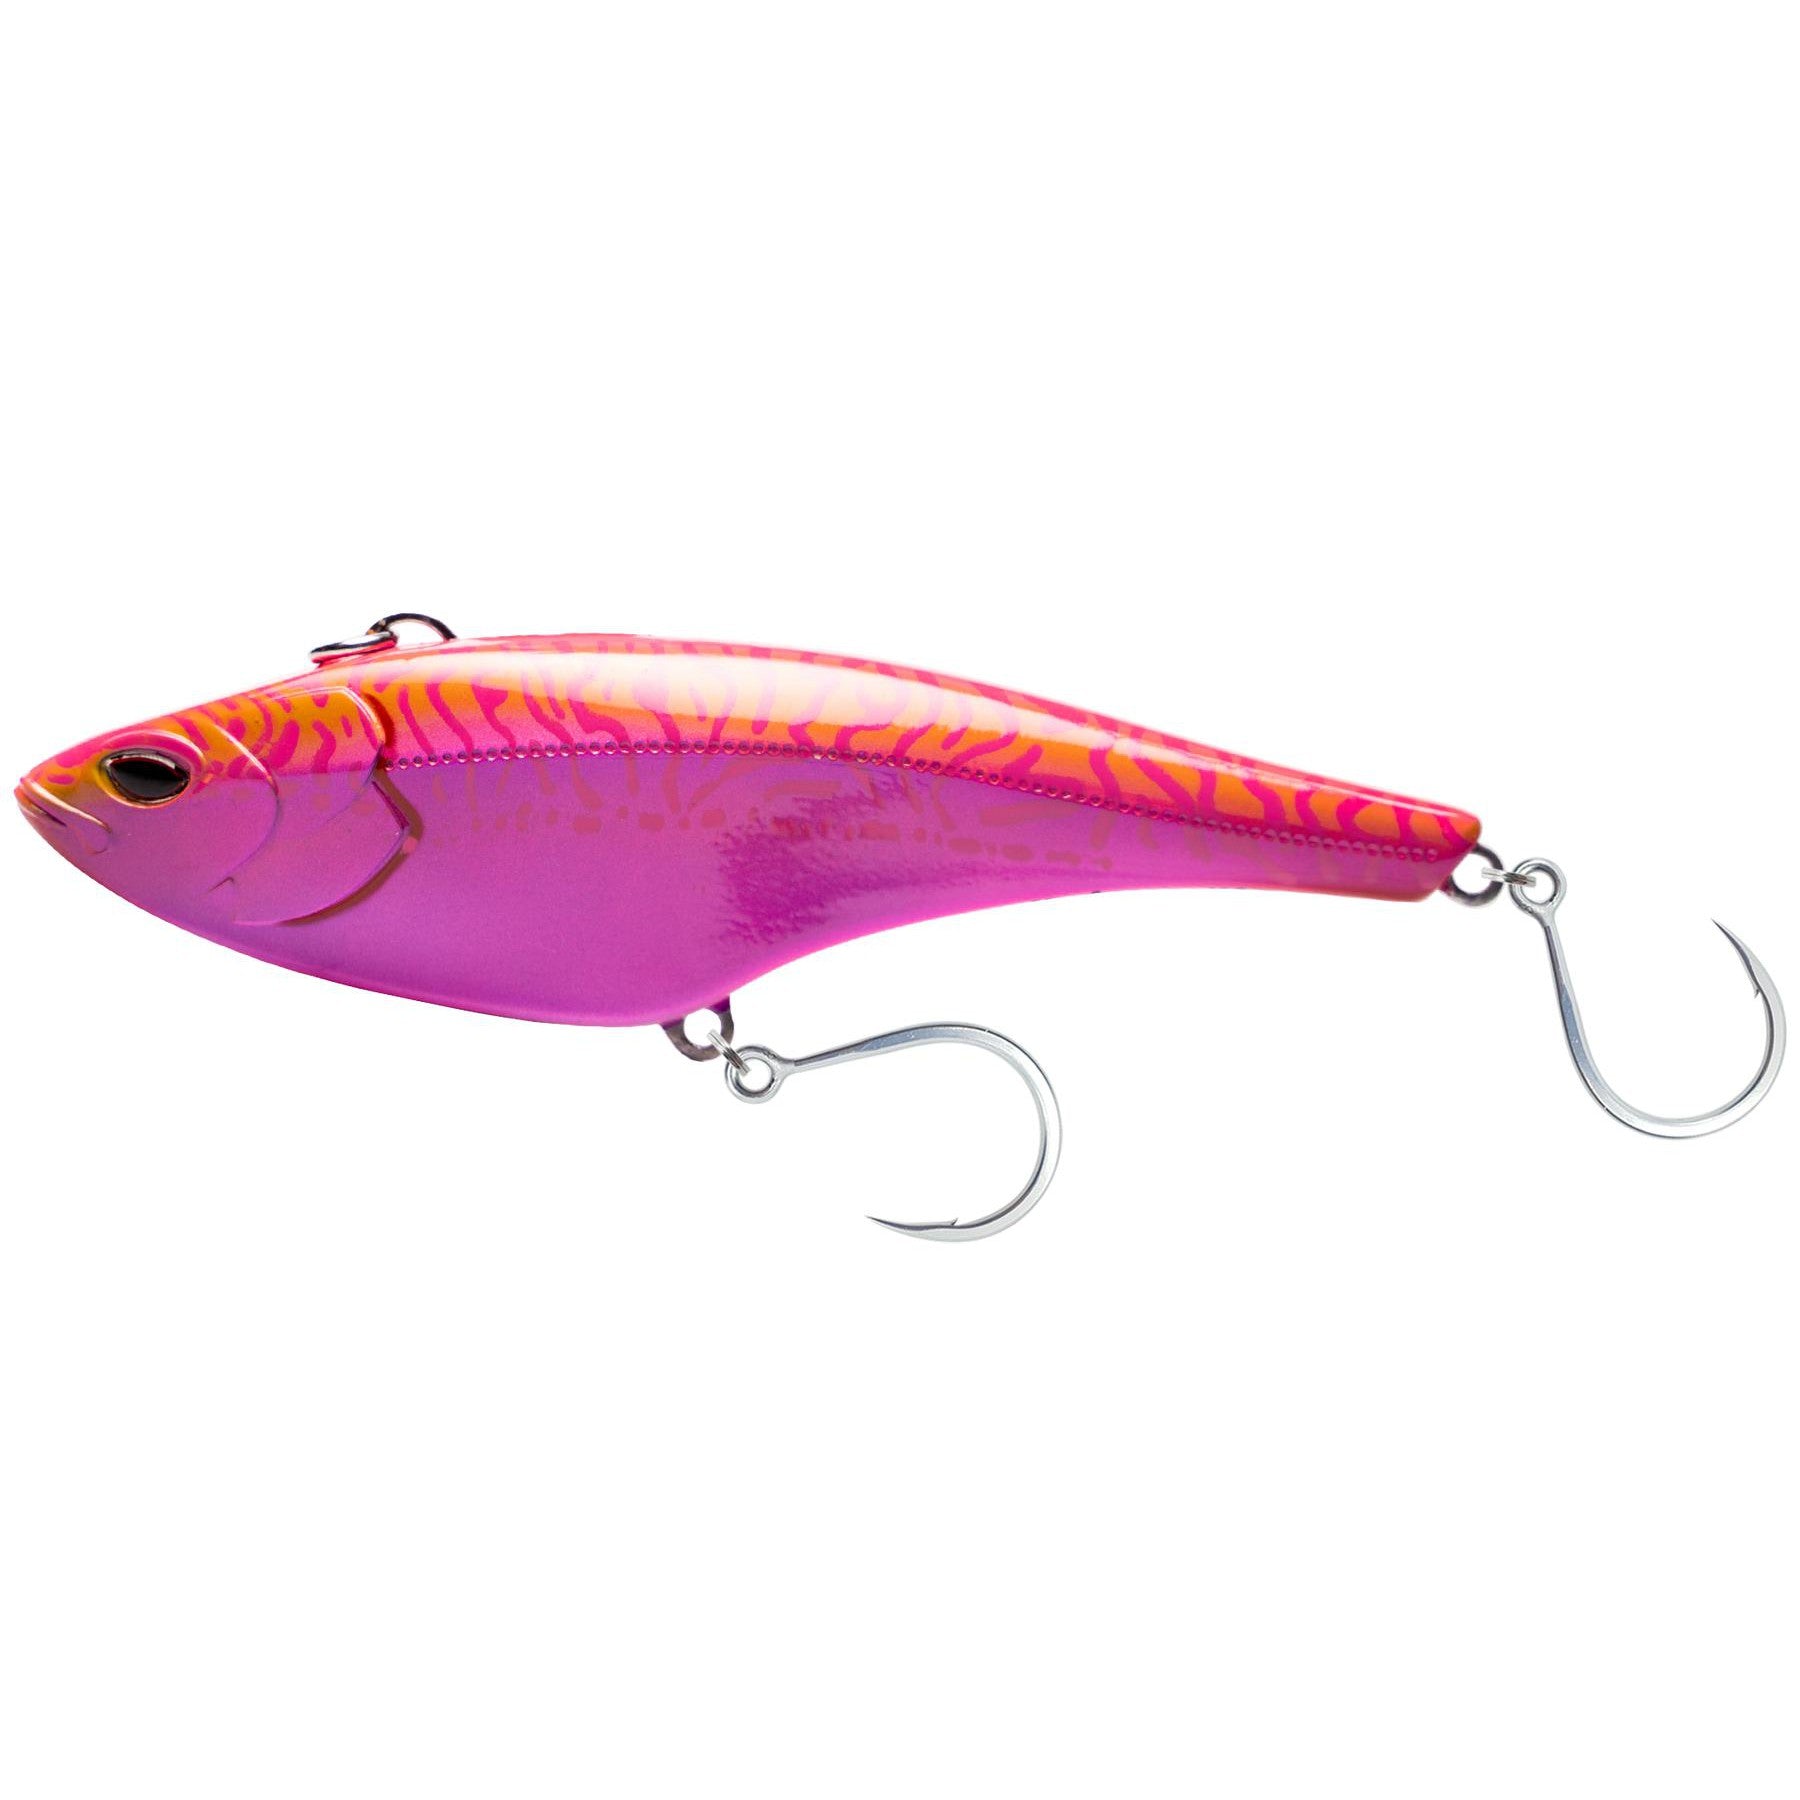 Nomad Tackle Madmacs High Speed Trolling Lure